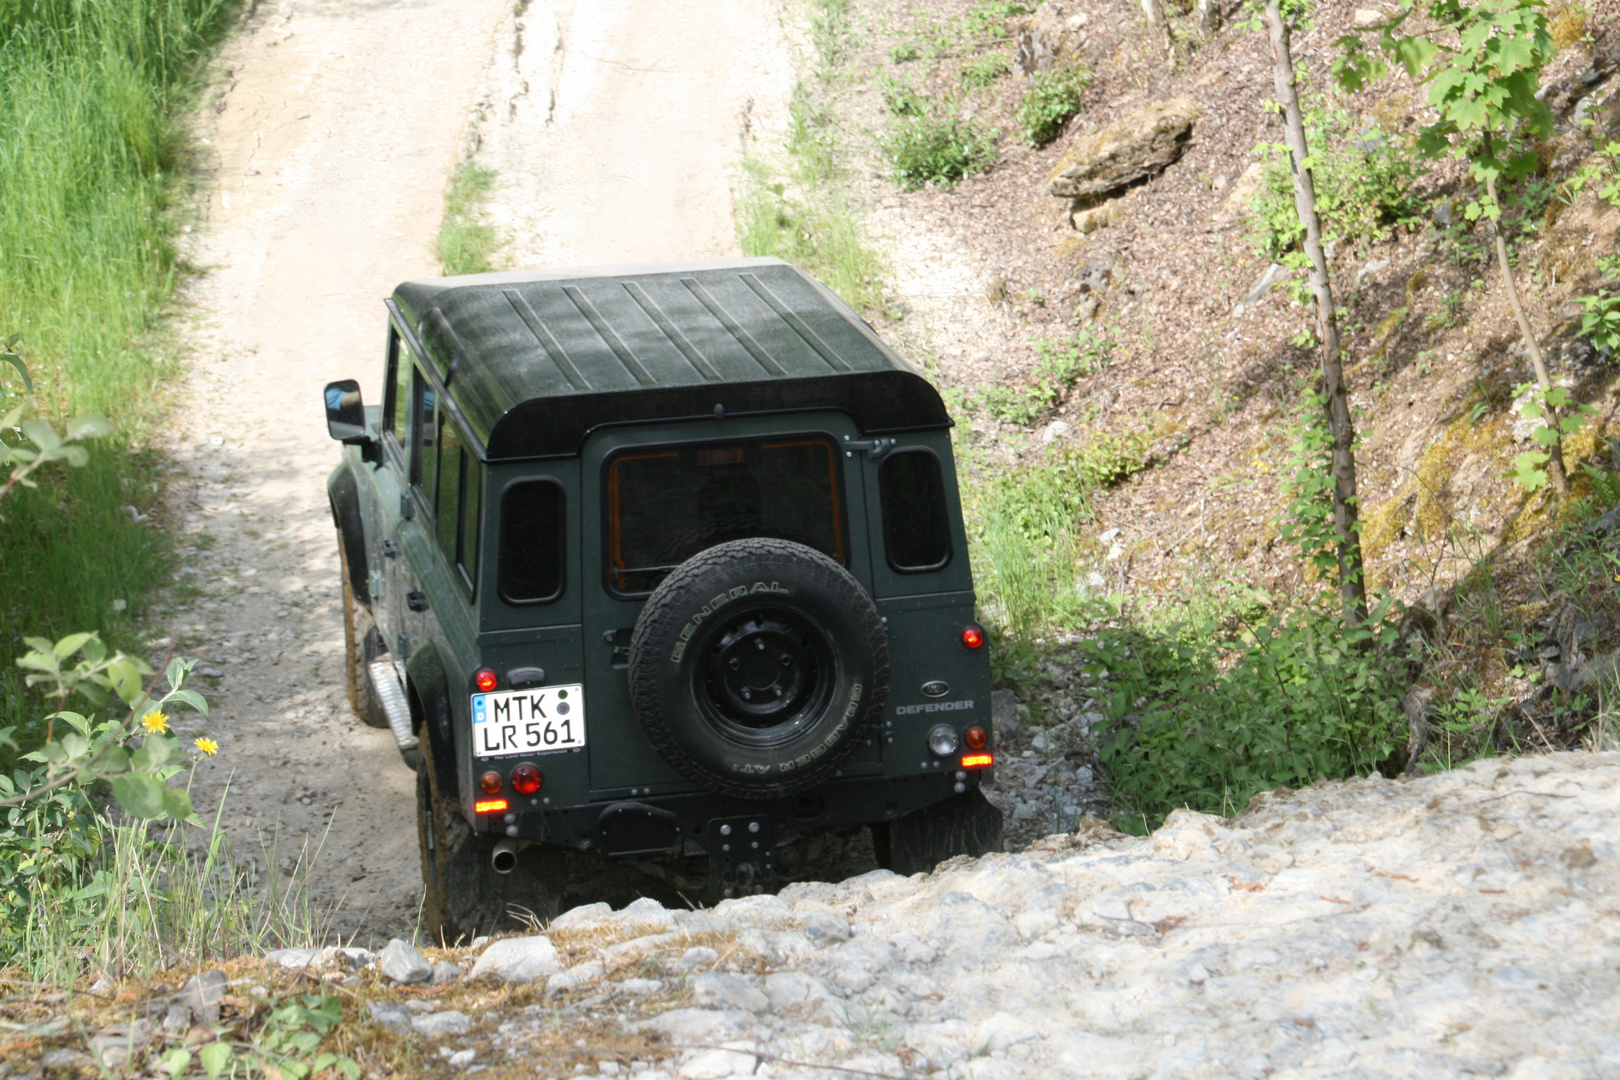 Landrover Defender Experience Day